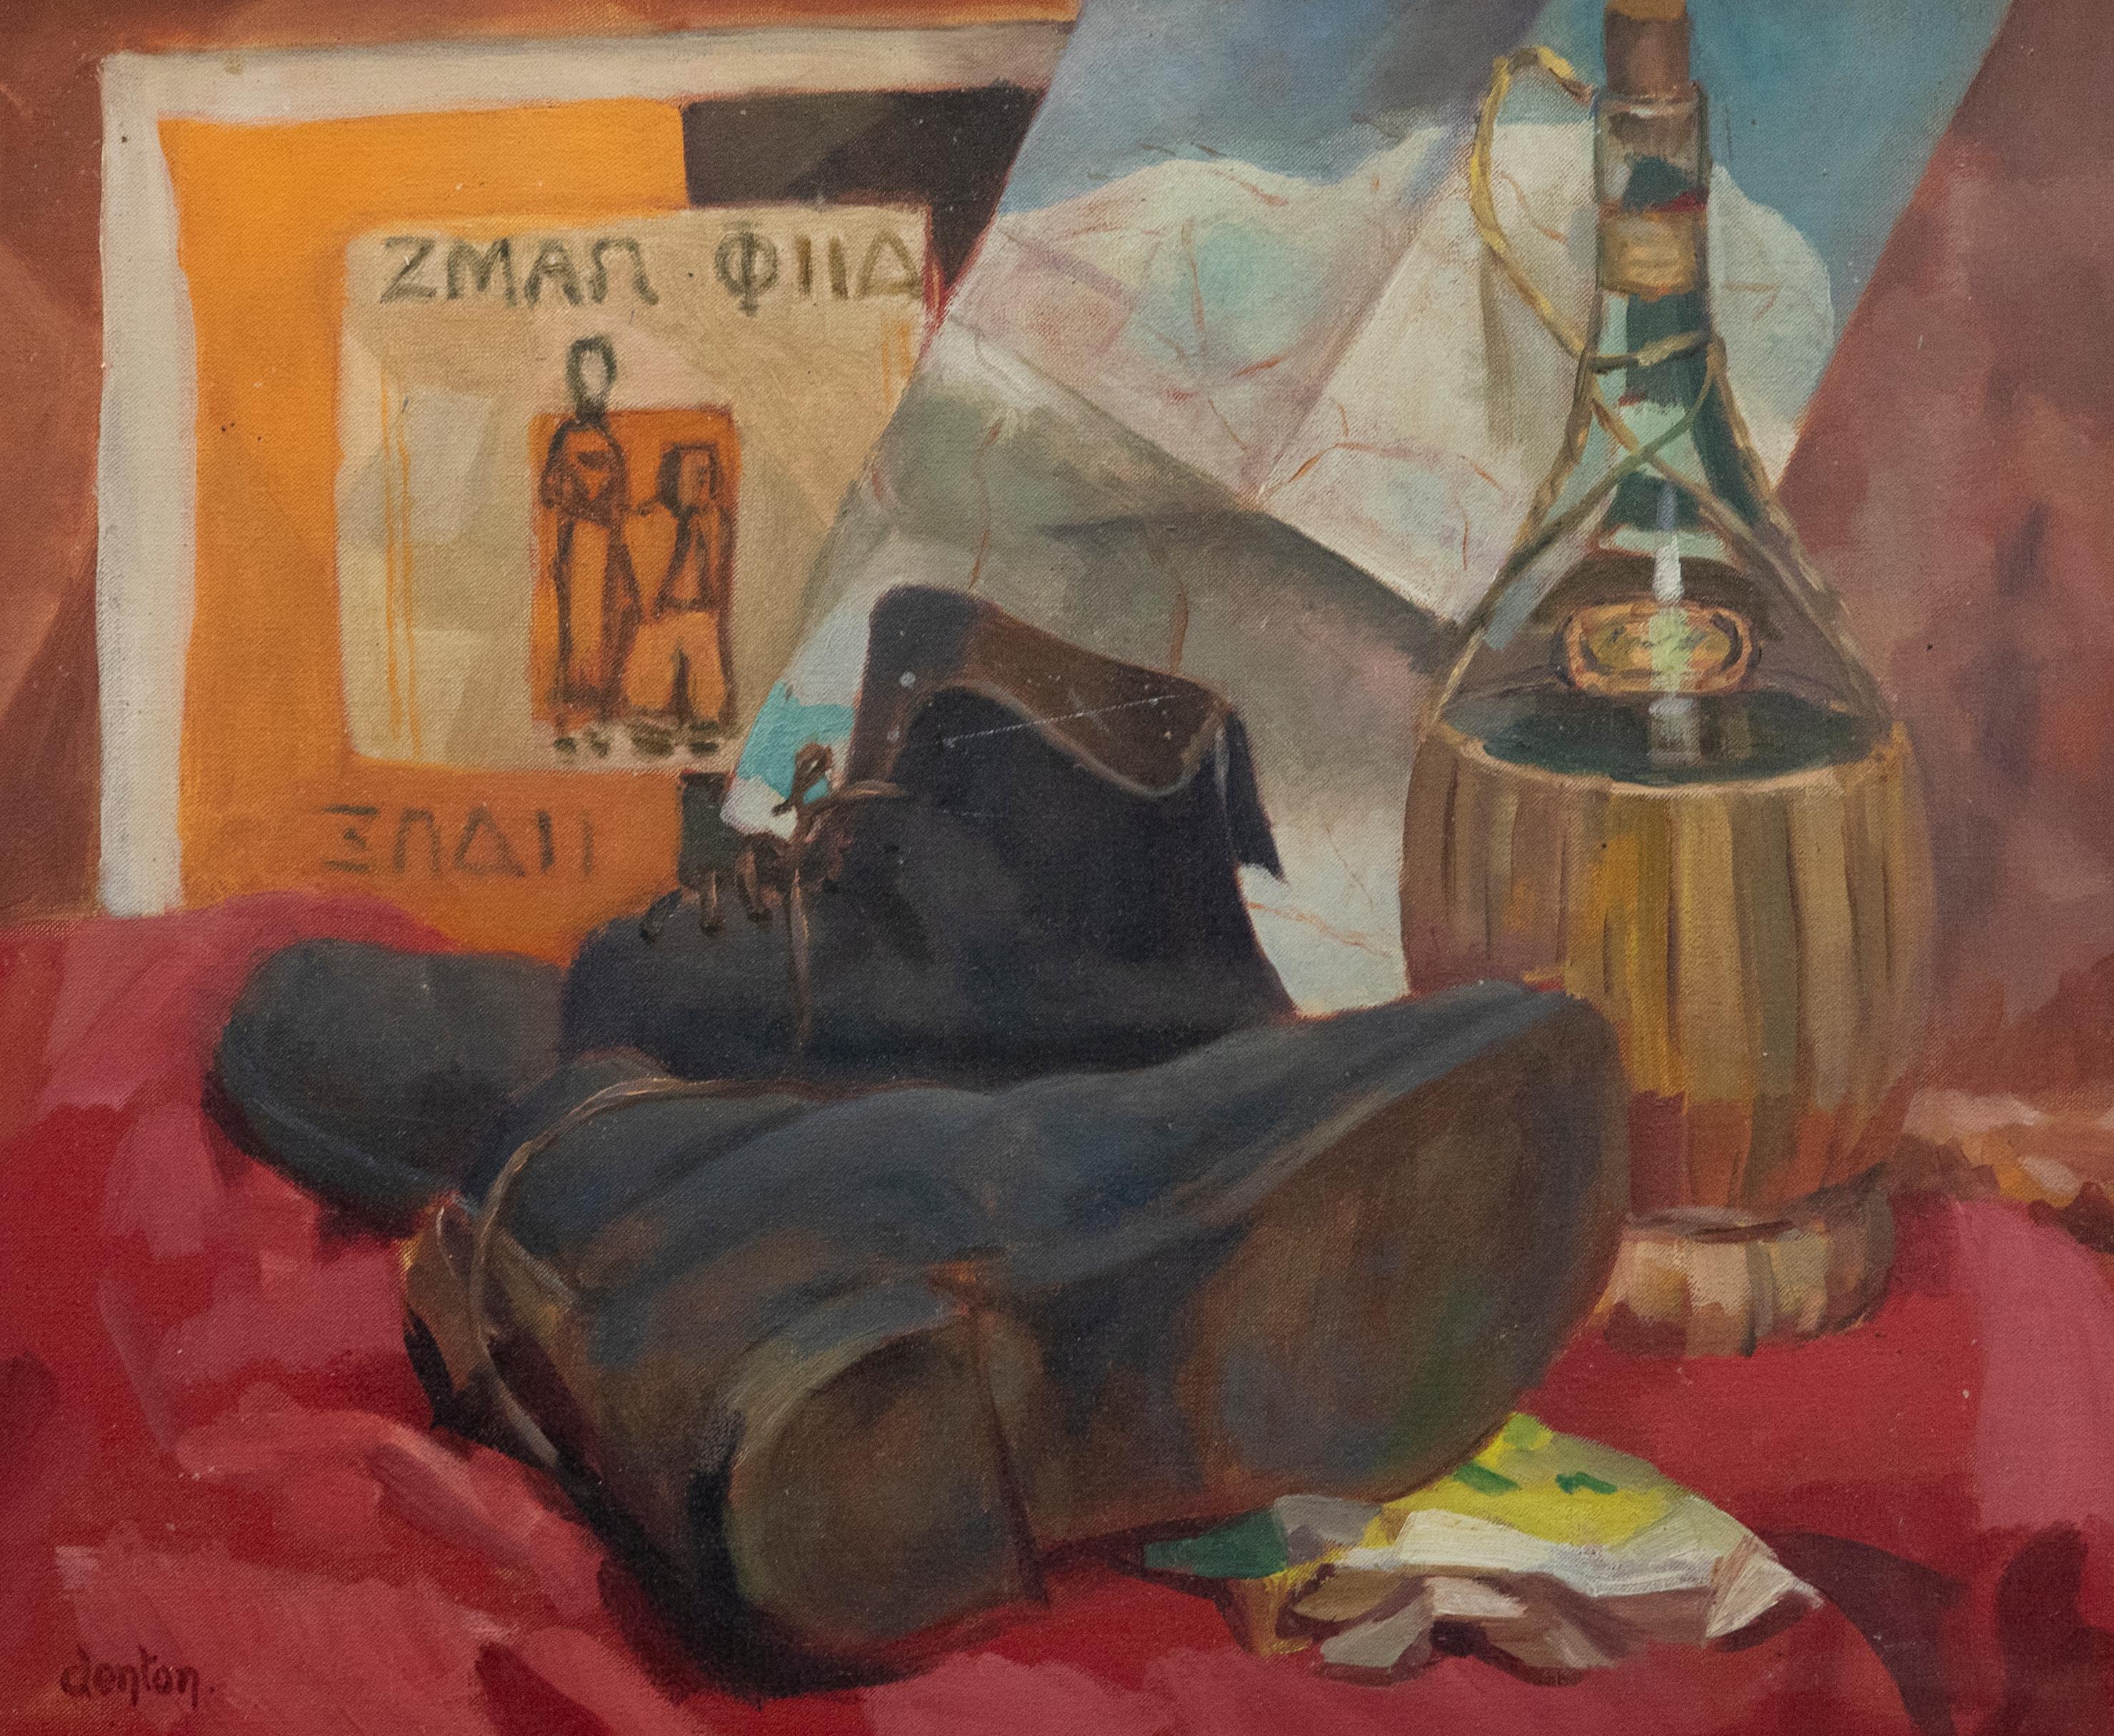 Denton - 20th Century Oil, Old Boots and Chianti - Painting by Unknown